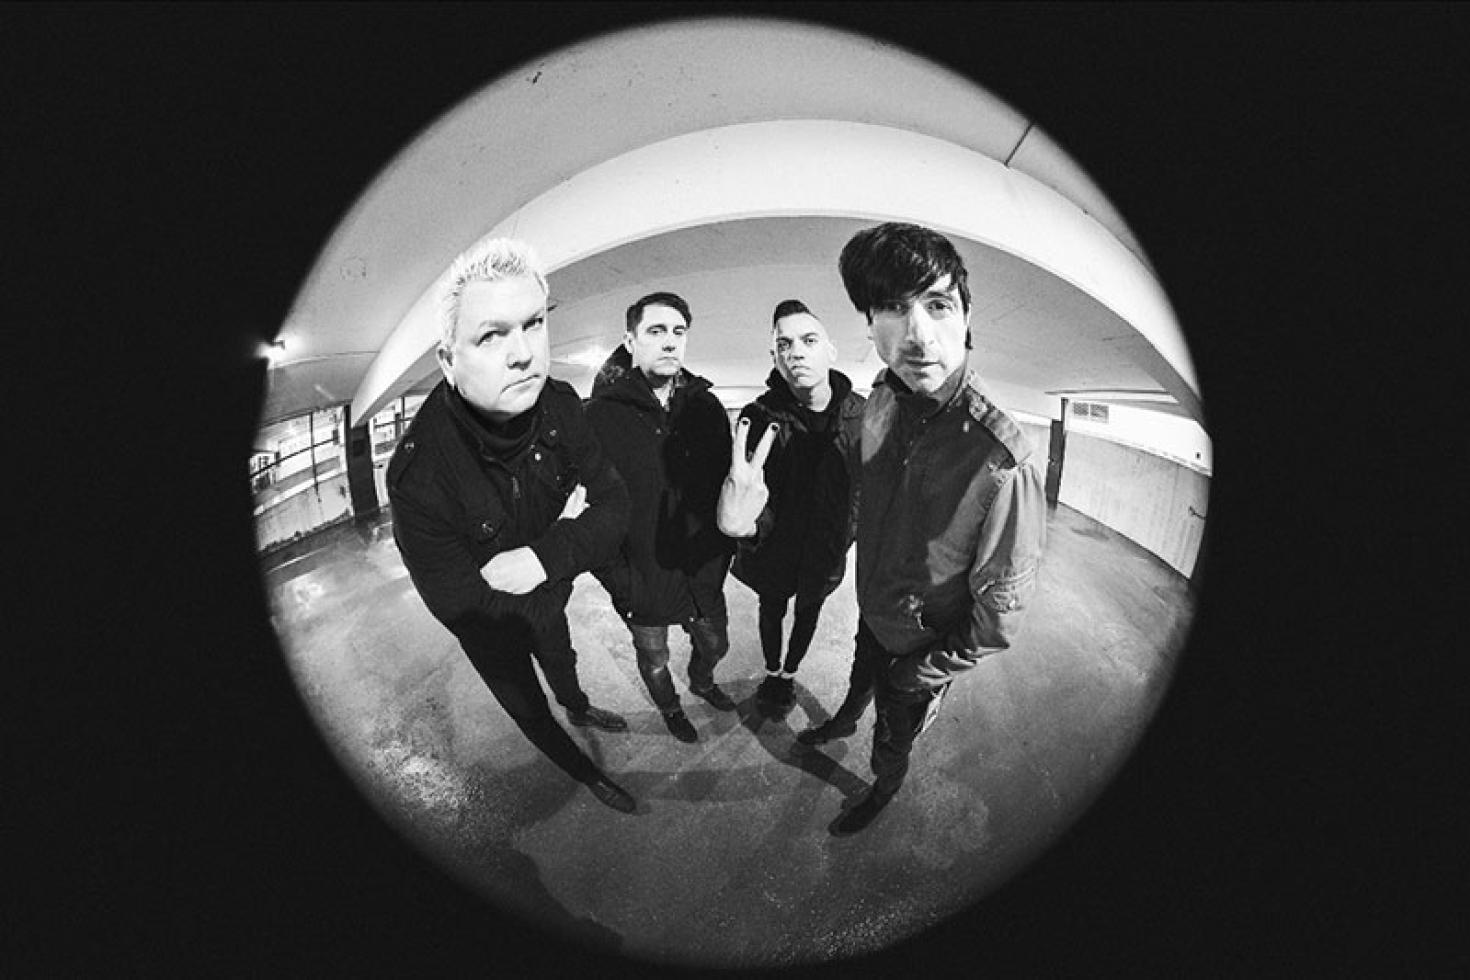 Anti-Flag share 'Fight Of Our Lives' ft. Rise Against's Tim McIlrath & Bad Religion's Brian Baker